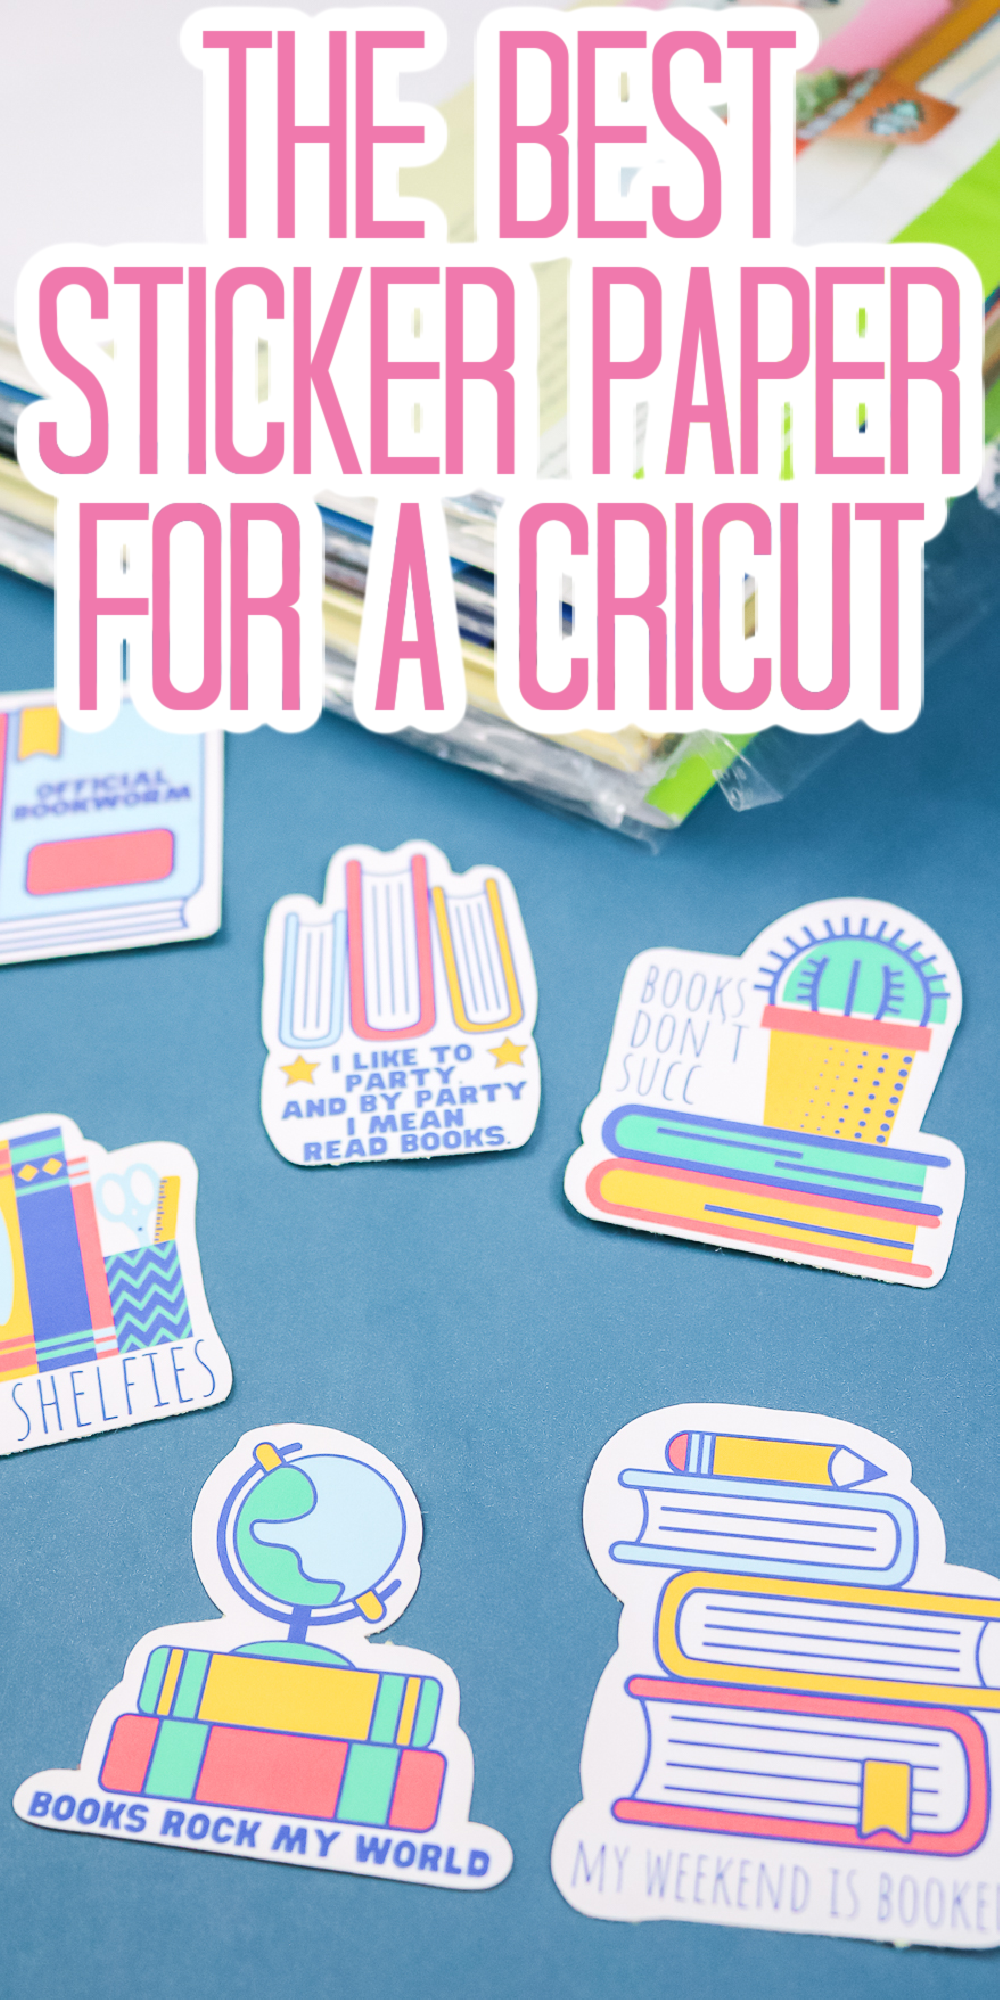 the-best-sticker-paper-for-a-cricut-patabook-home-improvements